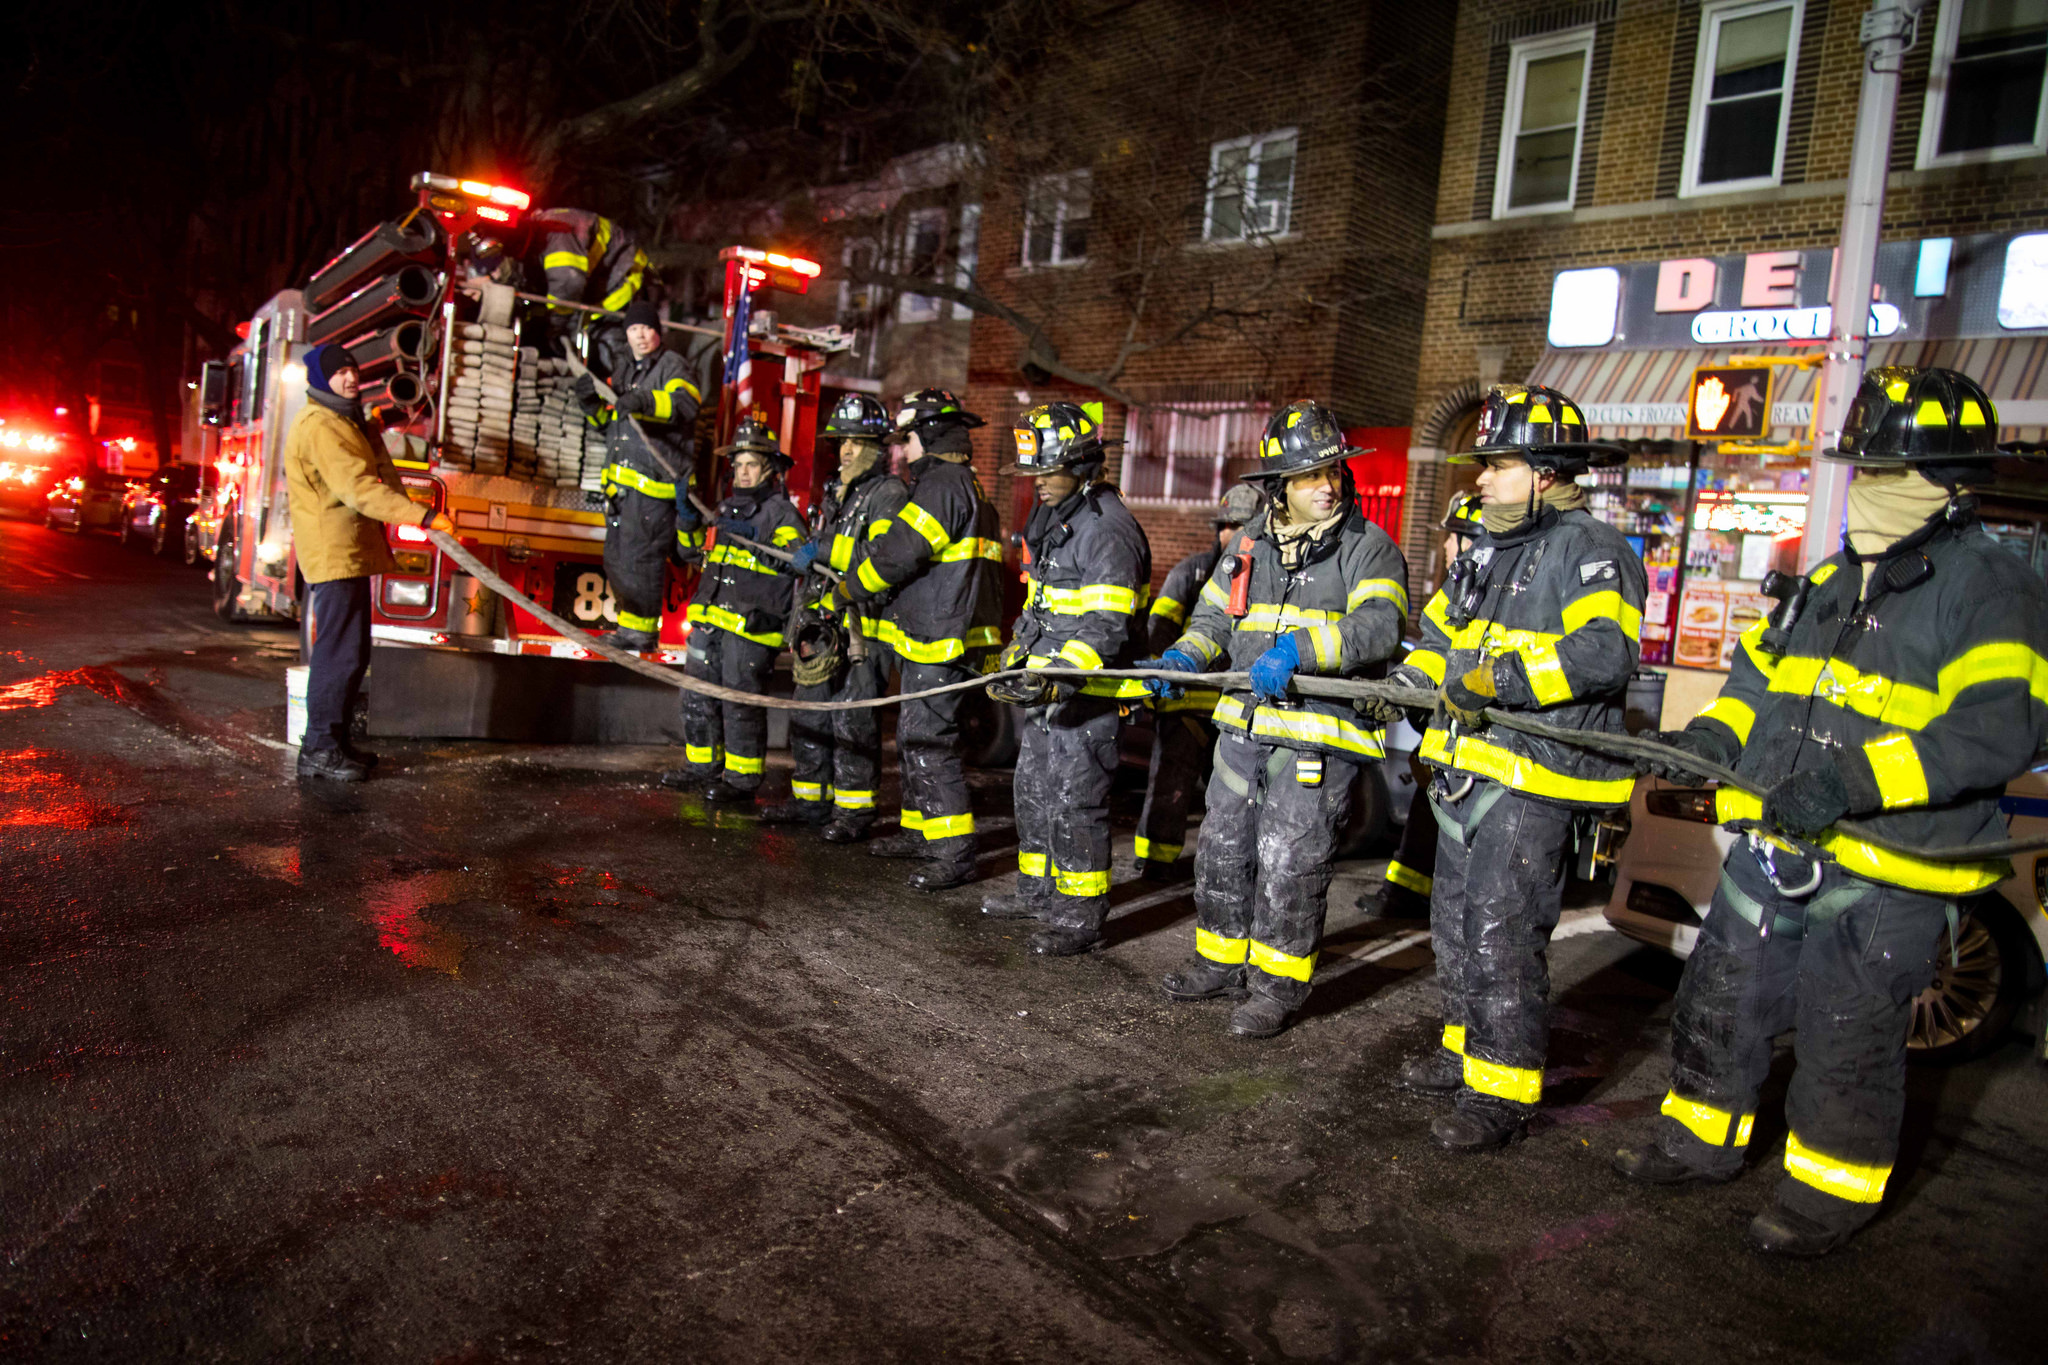 Firefighters battled freezing temperatures, as well as the flames, in a fire that killed at least 12 people in the Bronx on Dec. 28, 2017.